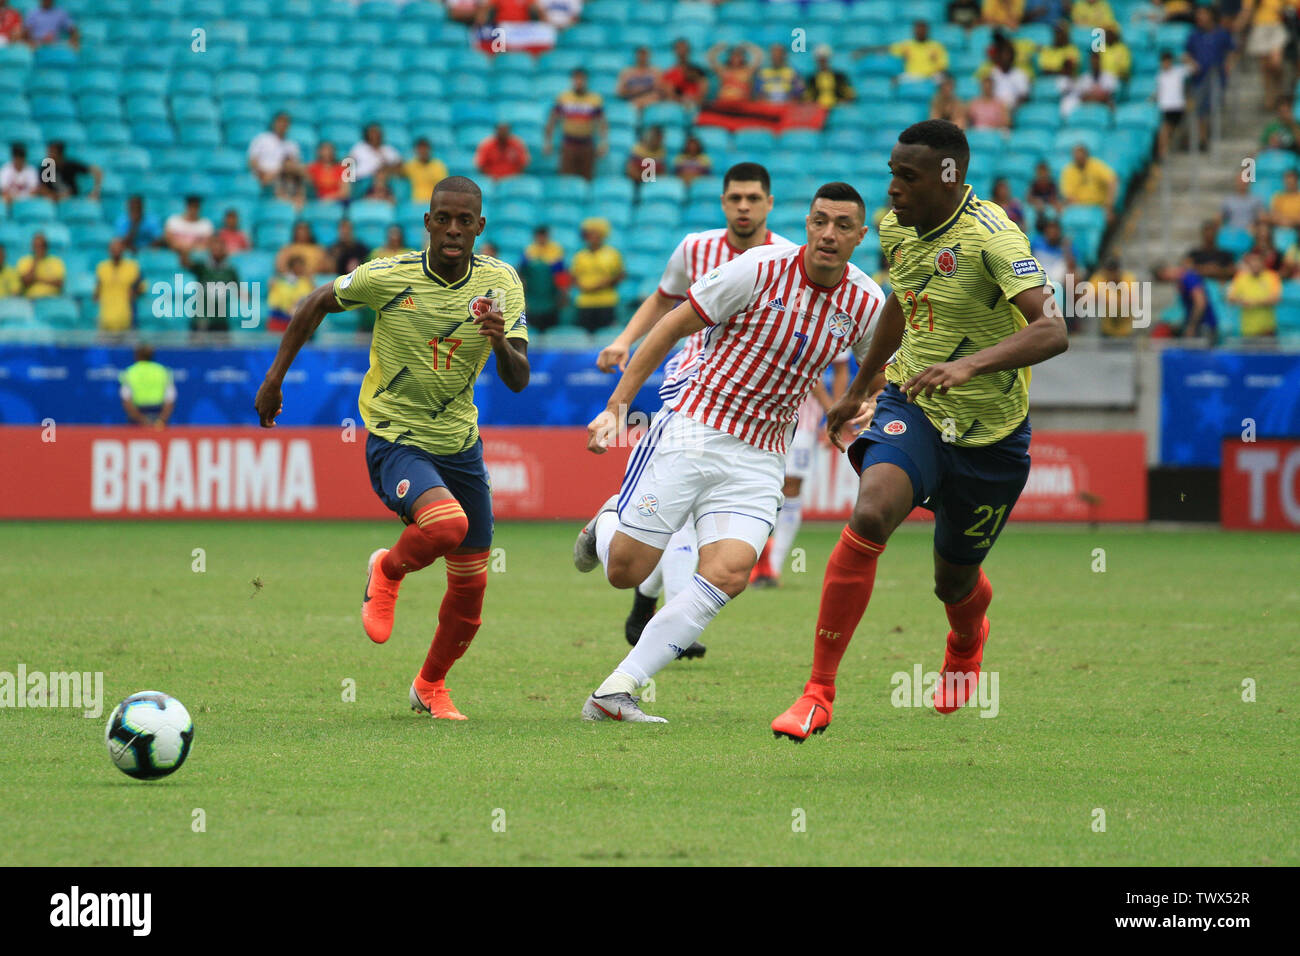 Salvador, Brazil. 23rd June, 2019. Cristian Borja, Oscar Cardozo and Jhon Lucumi during a match between Colombia and Paraguay, valid for the group stage of the Copa America 2019, held this Sunday (23) at the Arena Fonte Nova in Salvador, BA. Credit: Mauro Akiin Nassor/FotoArena/Alamy Live News Stock Photo